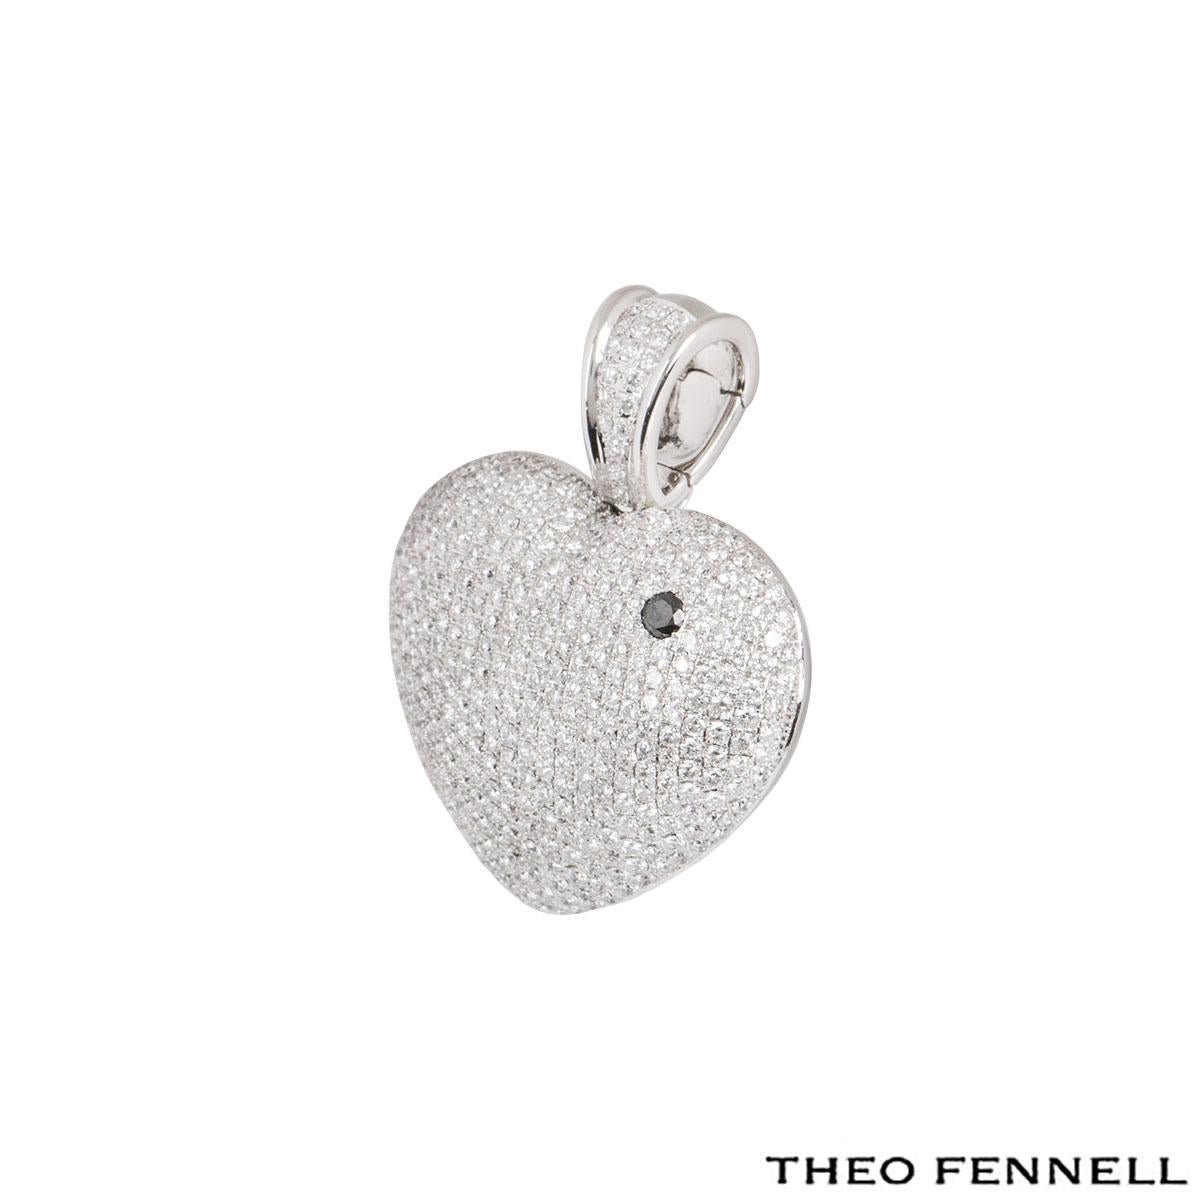 An 18k white gold diamond heart pendant by Theo Fennell from the 'Art collection. The heart motif pendant is set with pave round brilliant cut diamonds with a single black one. There are approximately 252 round brilliant cut diamonds with an